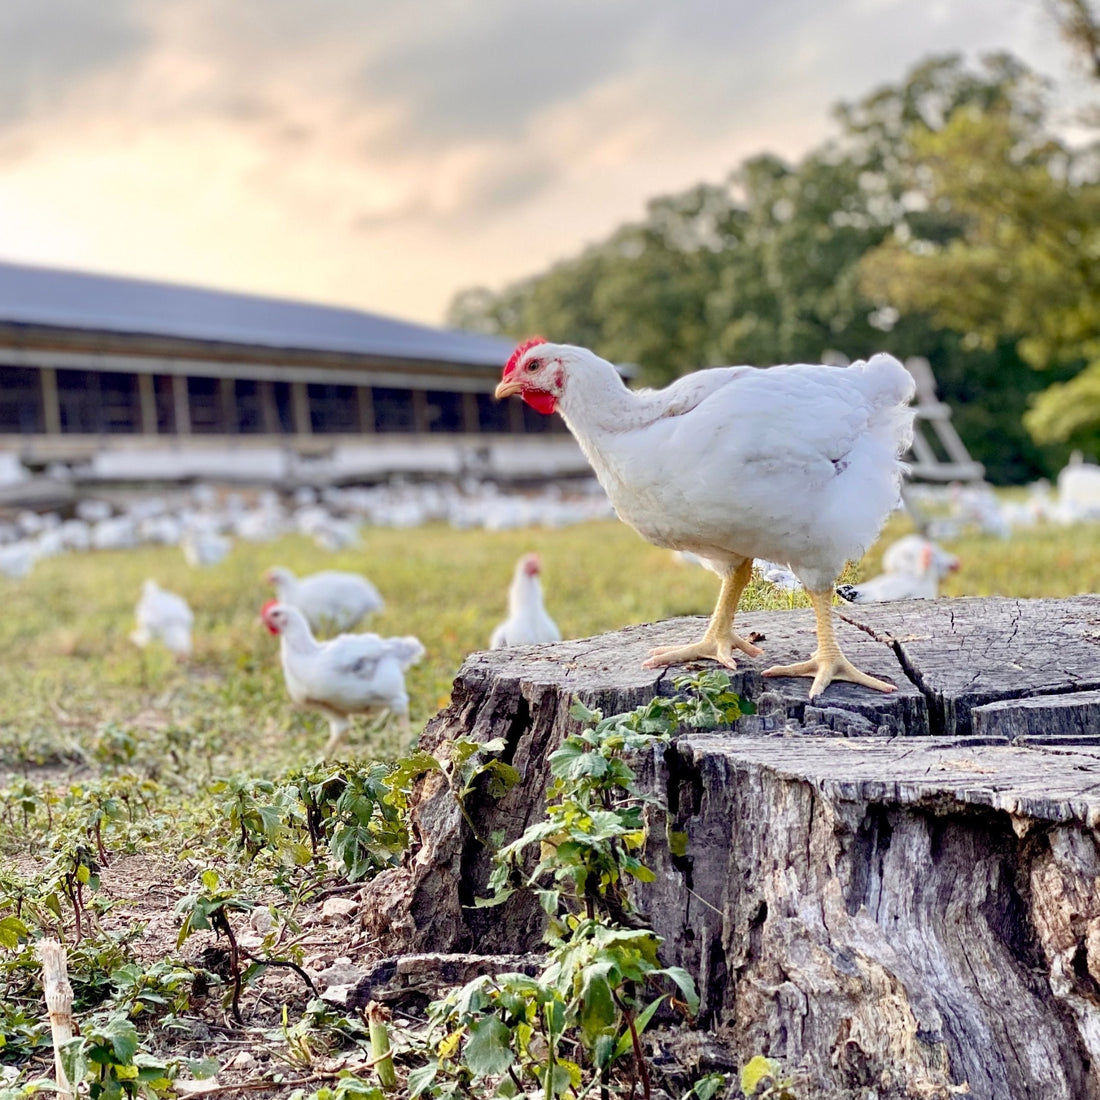 Chickens on logs and walking through a pasture next to a chicken house.